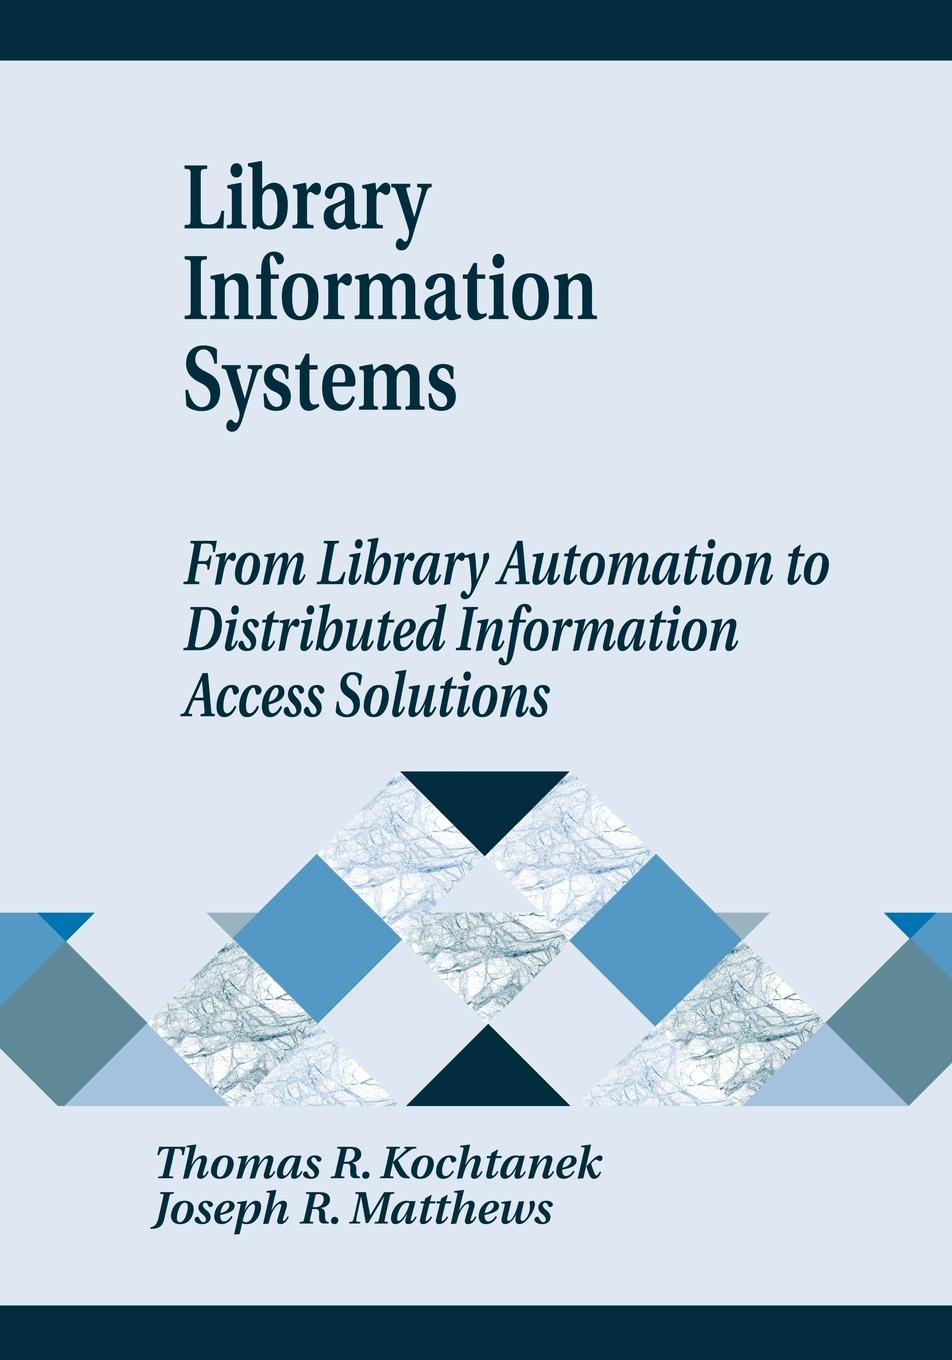 Library Information Systems. From Library Automation to Distributed Information Access Solutions